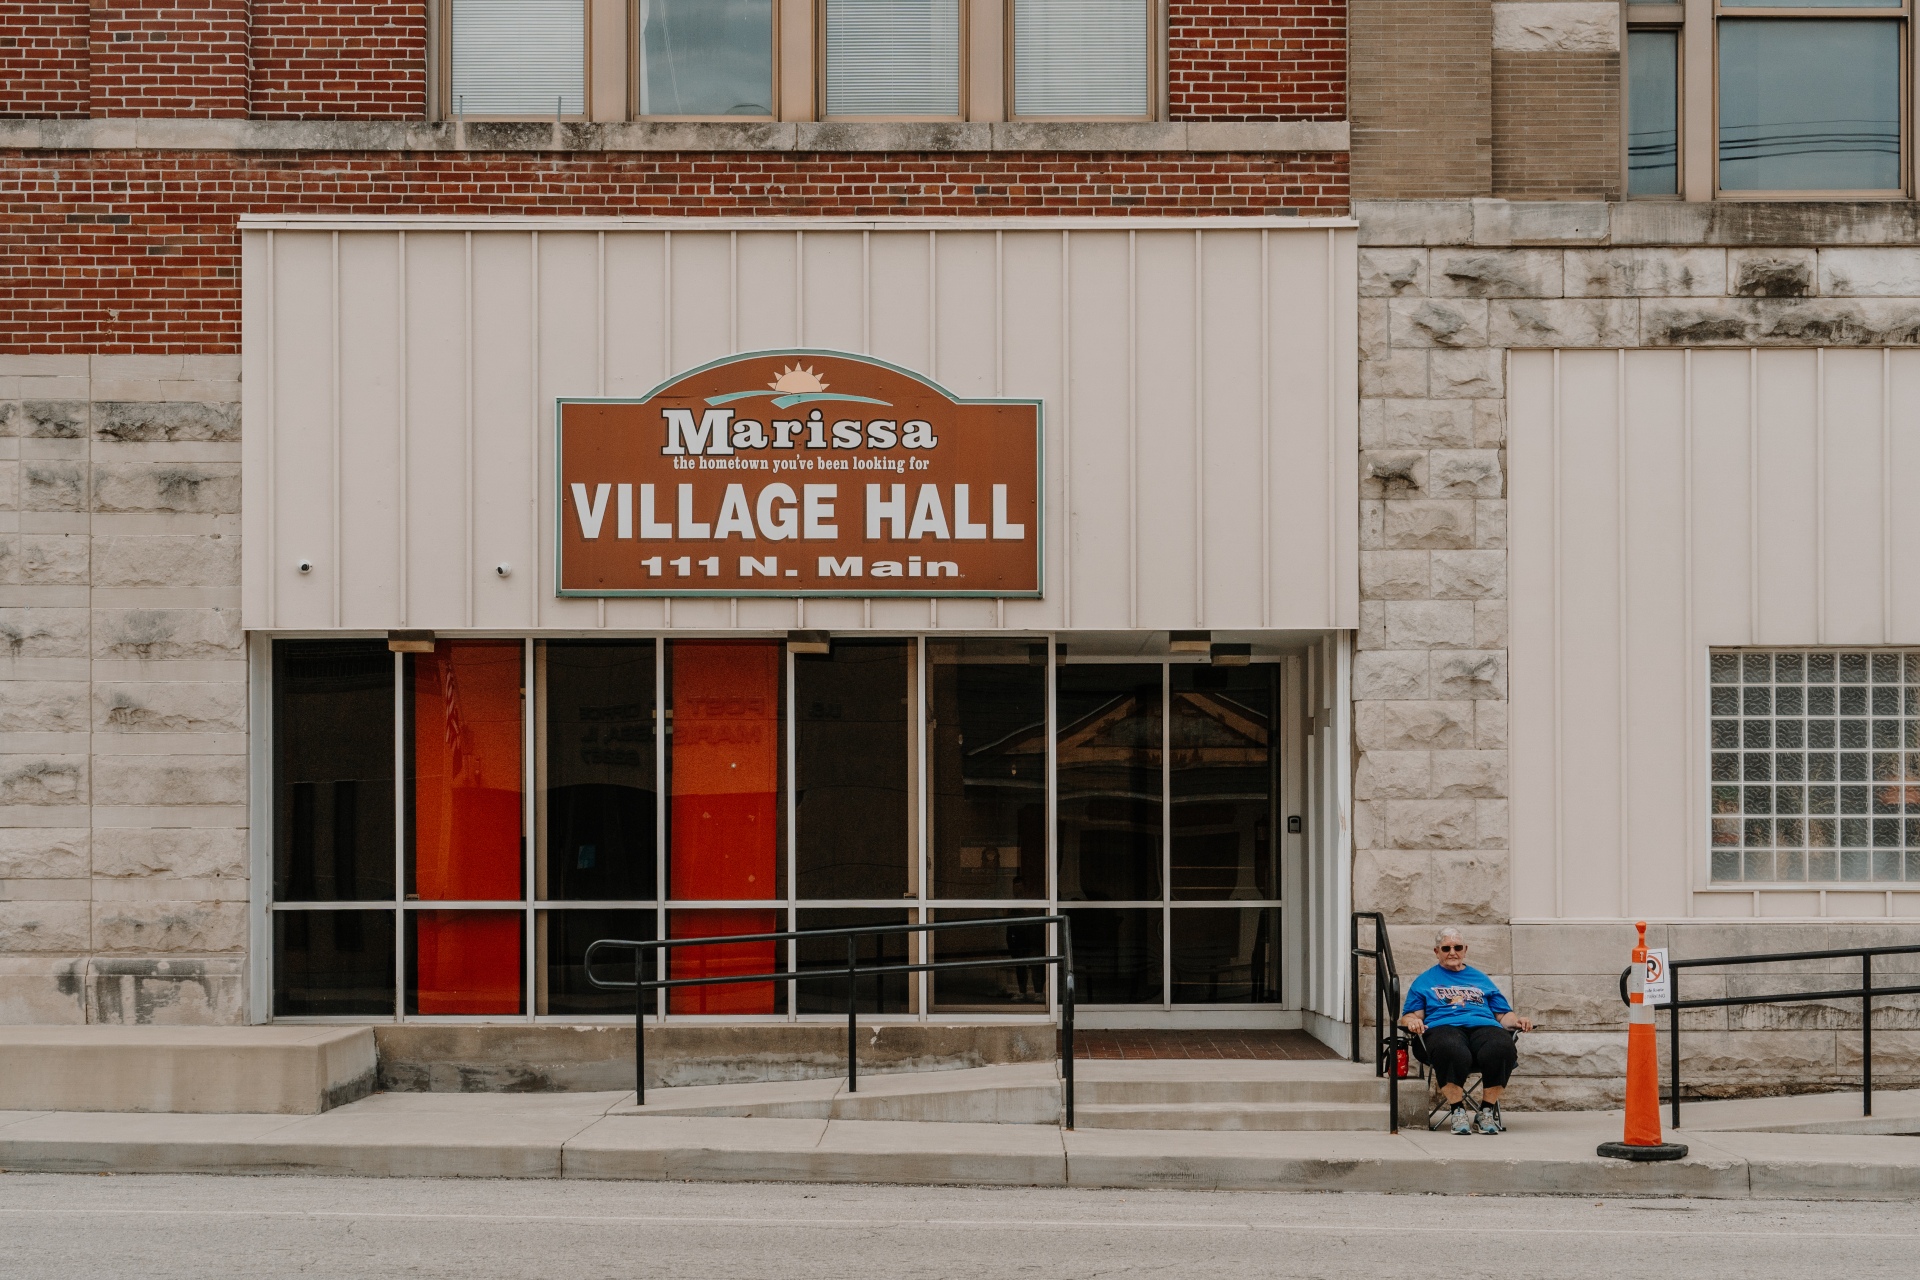 Rosemary Fulton sits in a folding chair next to the doorway of a large stone and brick building. A brown sign above the doorway reads: Marissa, the hometown you've been looking for. Village Hall. 111 N. Main.